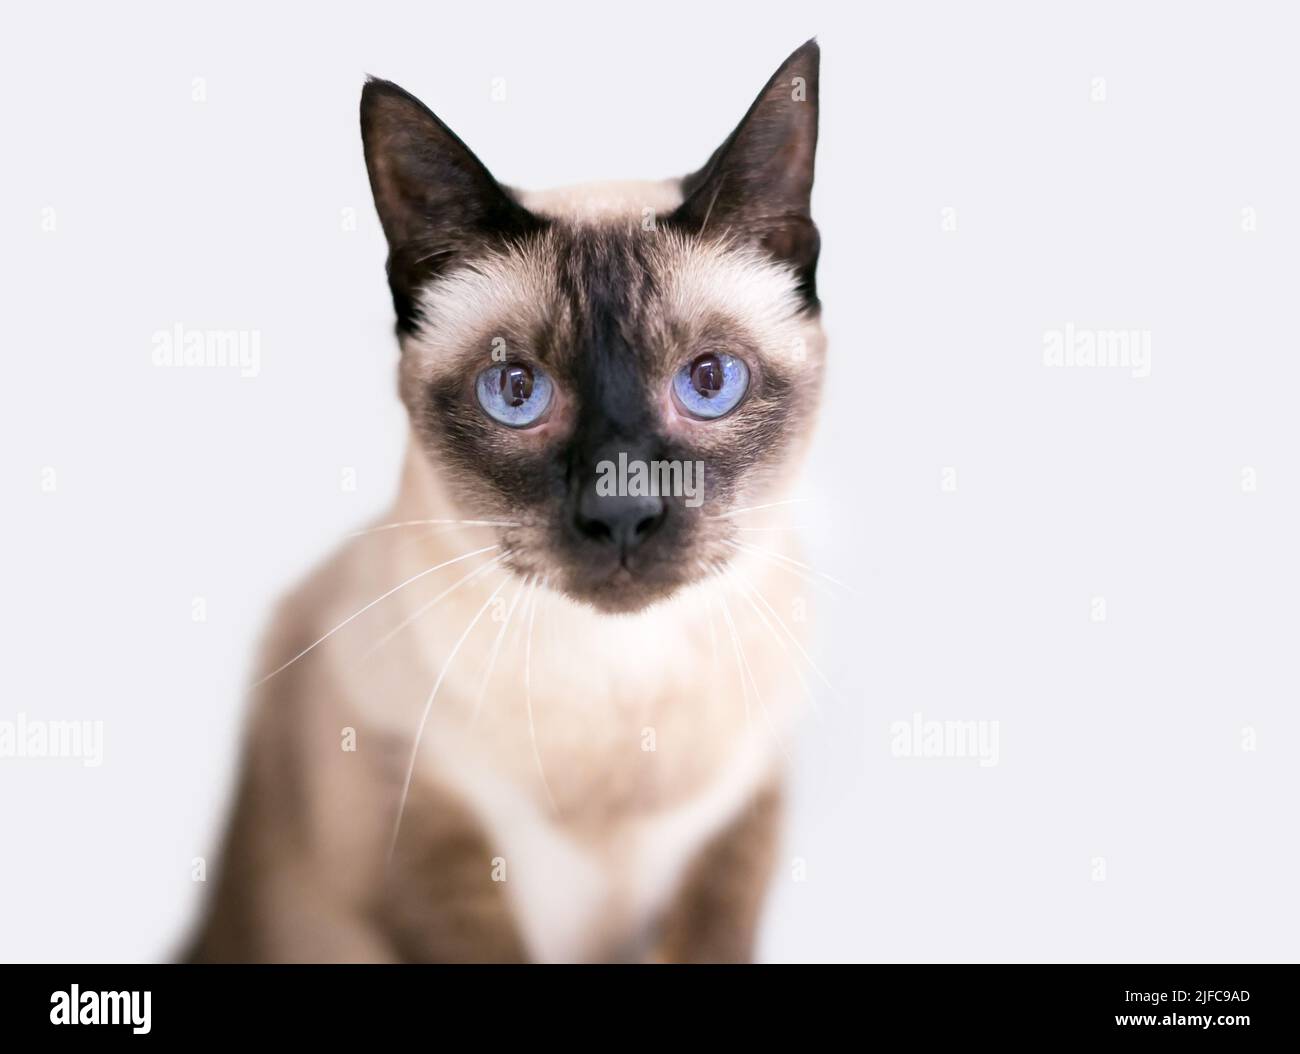 A purebred Siamese cat with blue eyes looking at the camera Stock Photo